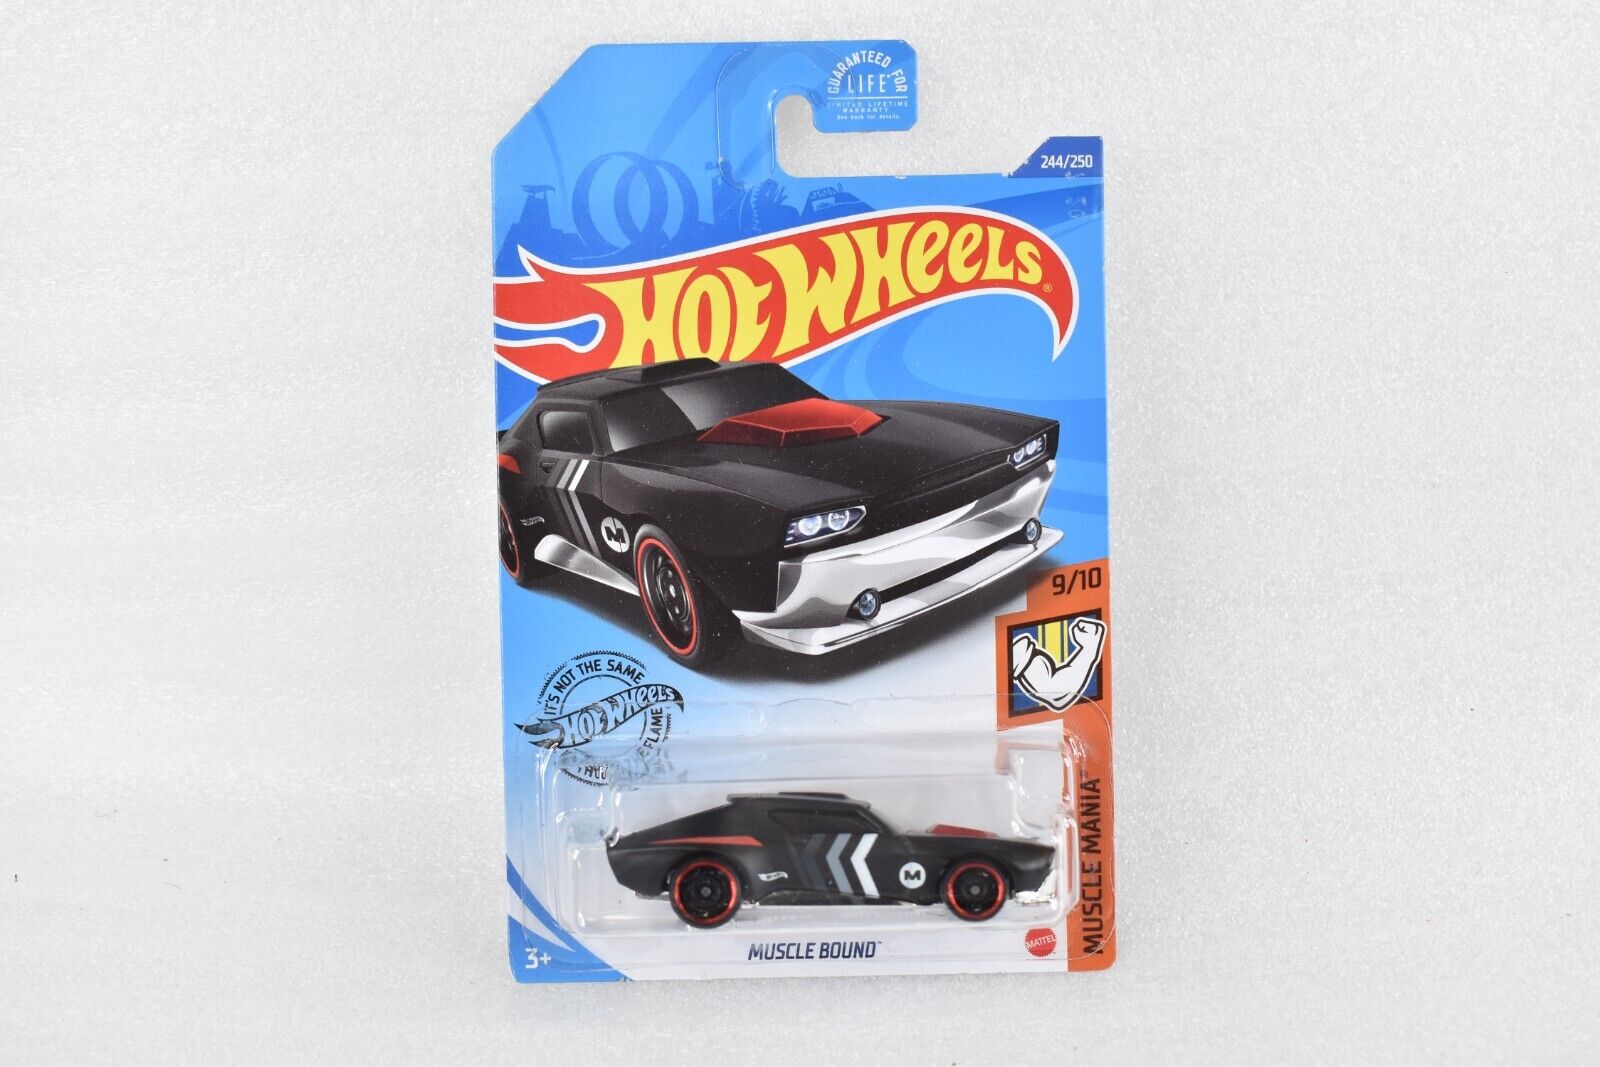 Hot Wheels - 2020 Muscle Mania 9/10 Muscle Bound 244/250 (BBGHD12)